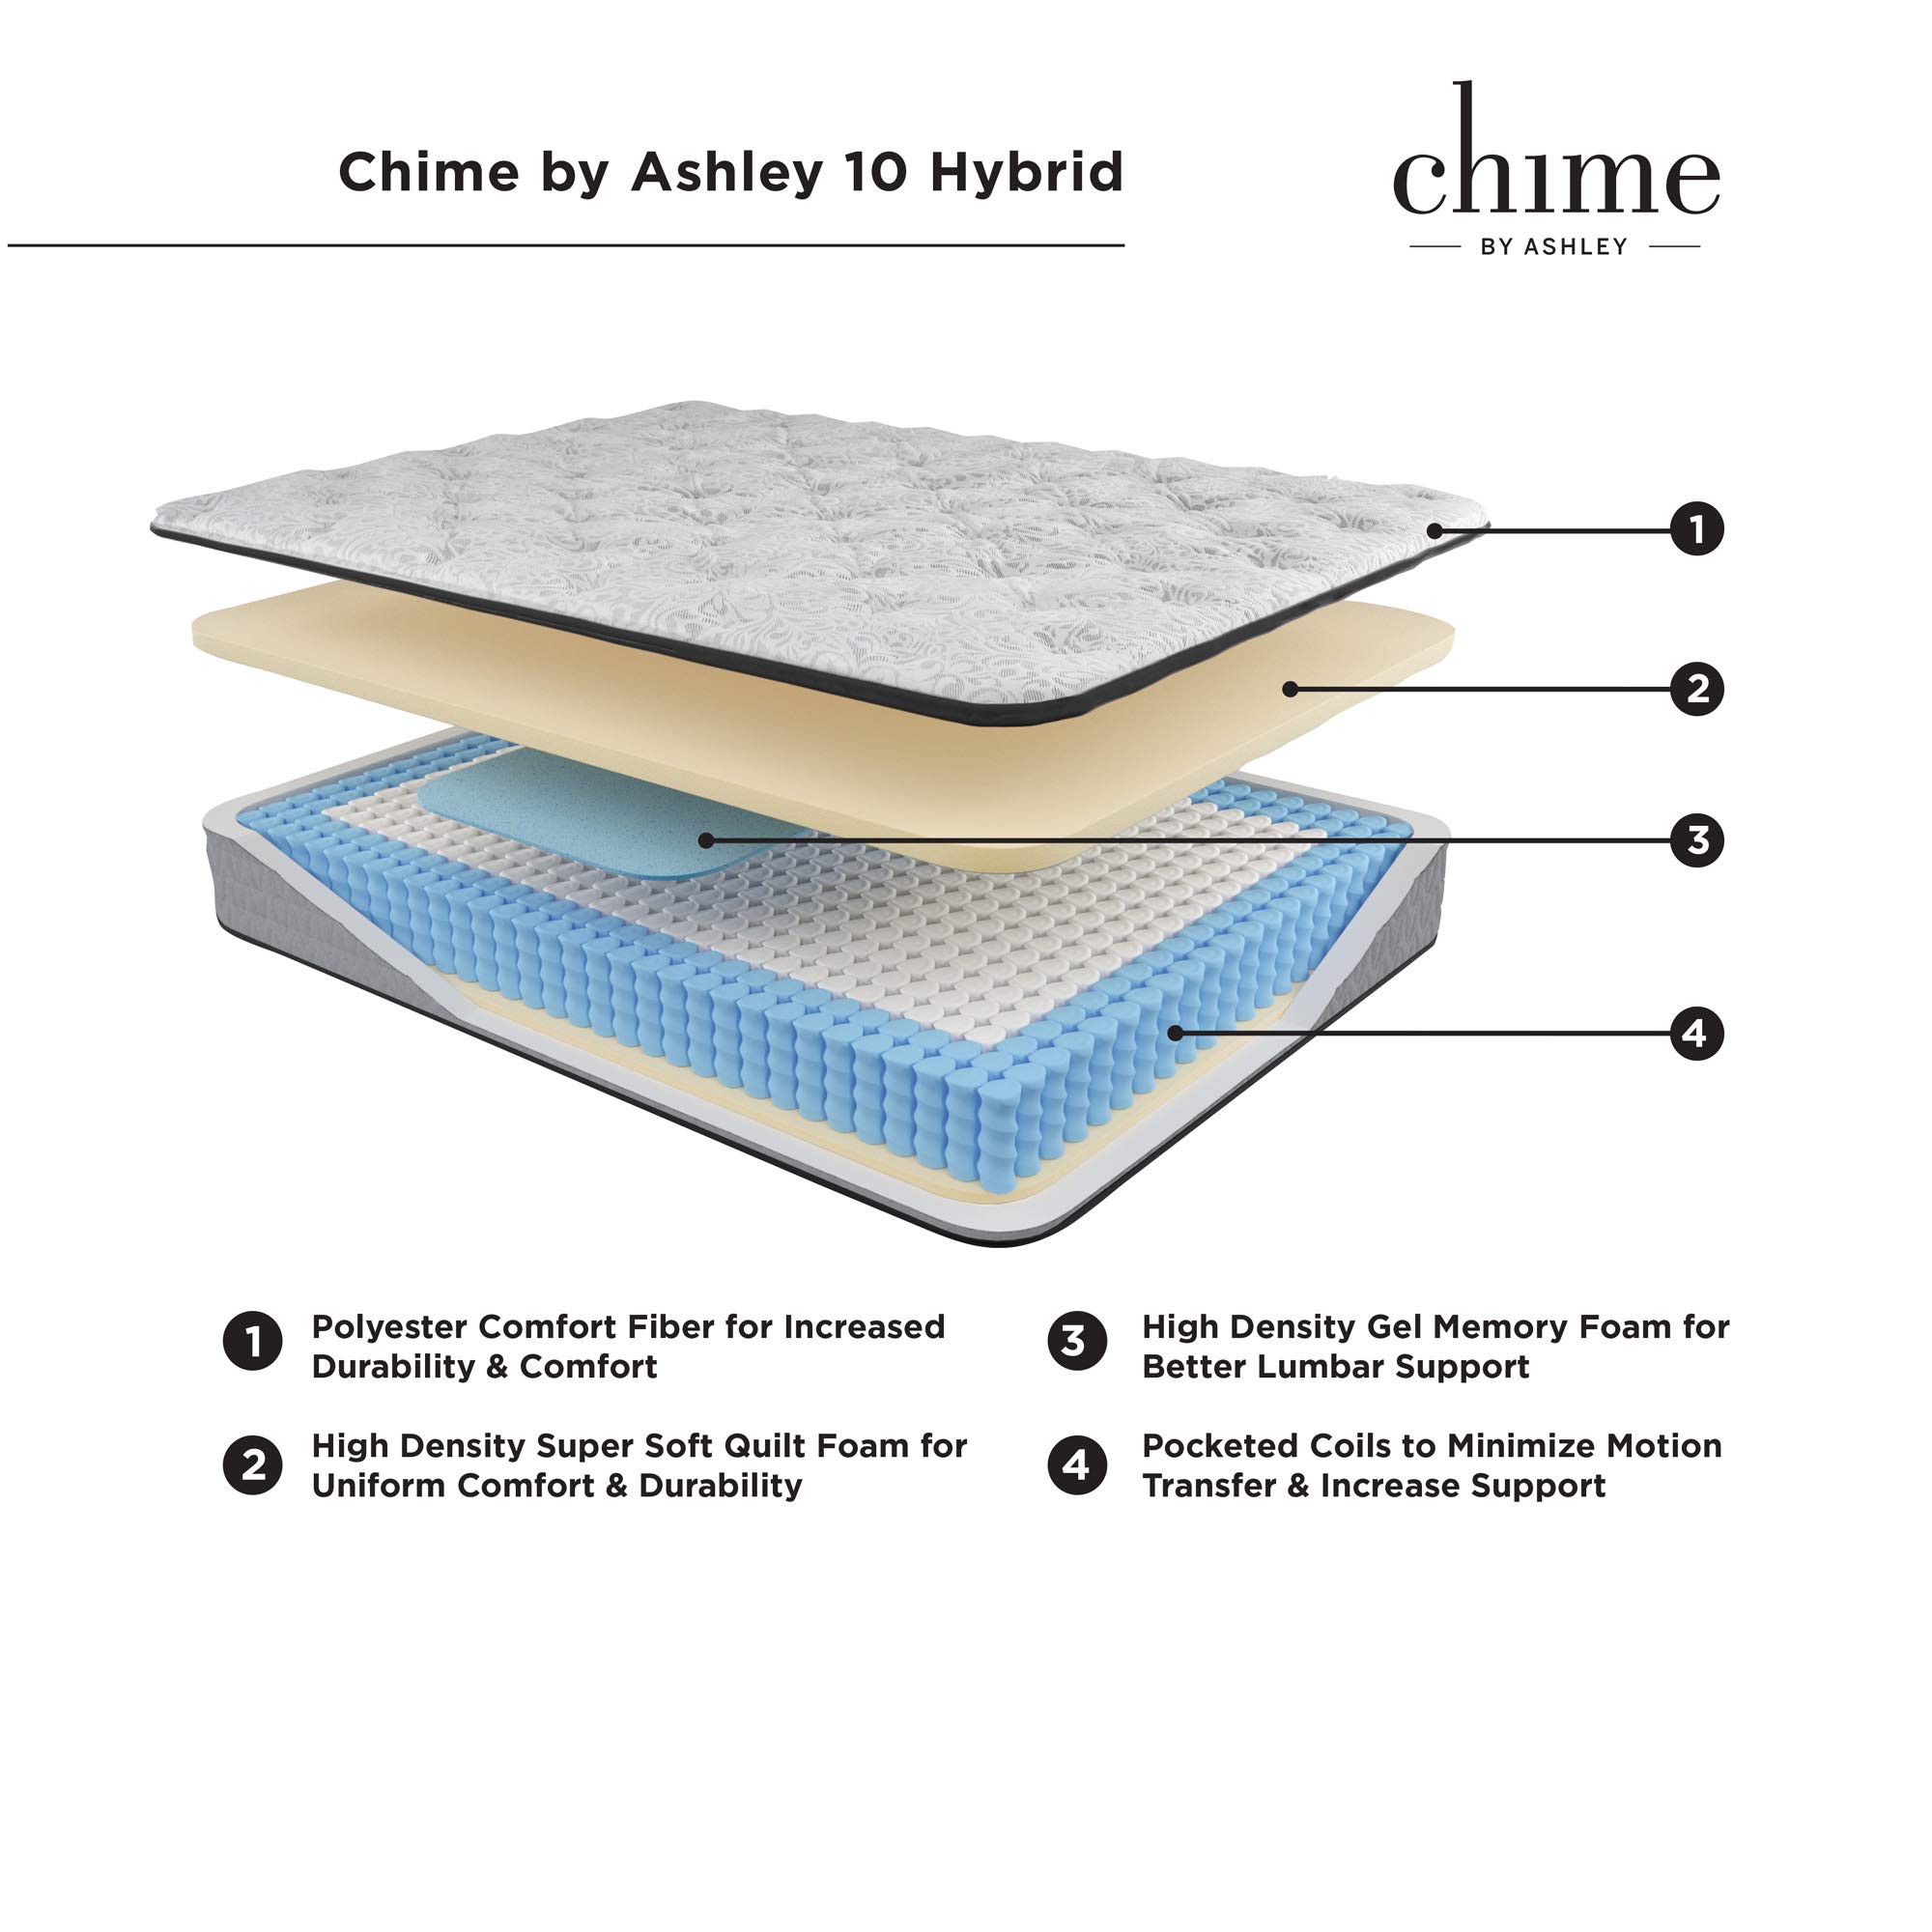 Signature DESIGN BY ASHLEY Chime 10 Inch Medium Firm Hybrid Matress - CertiPUR-US Certified Foam, Queen.